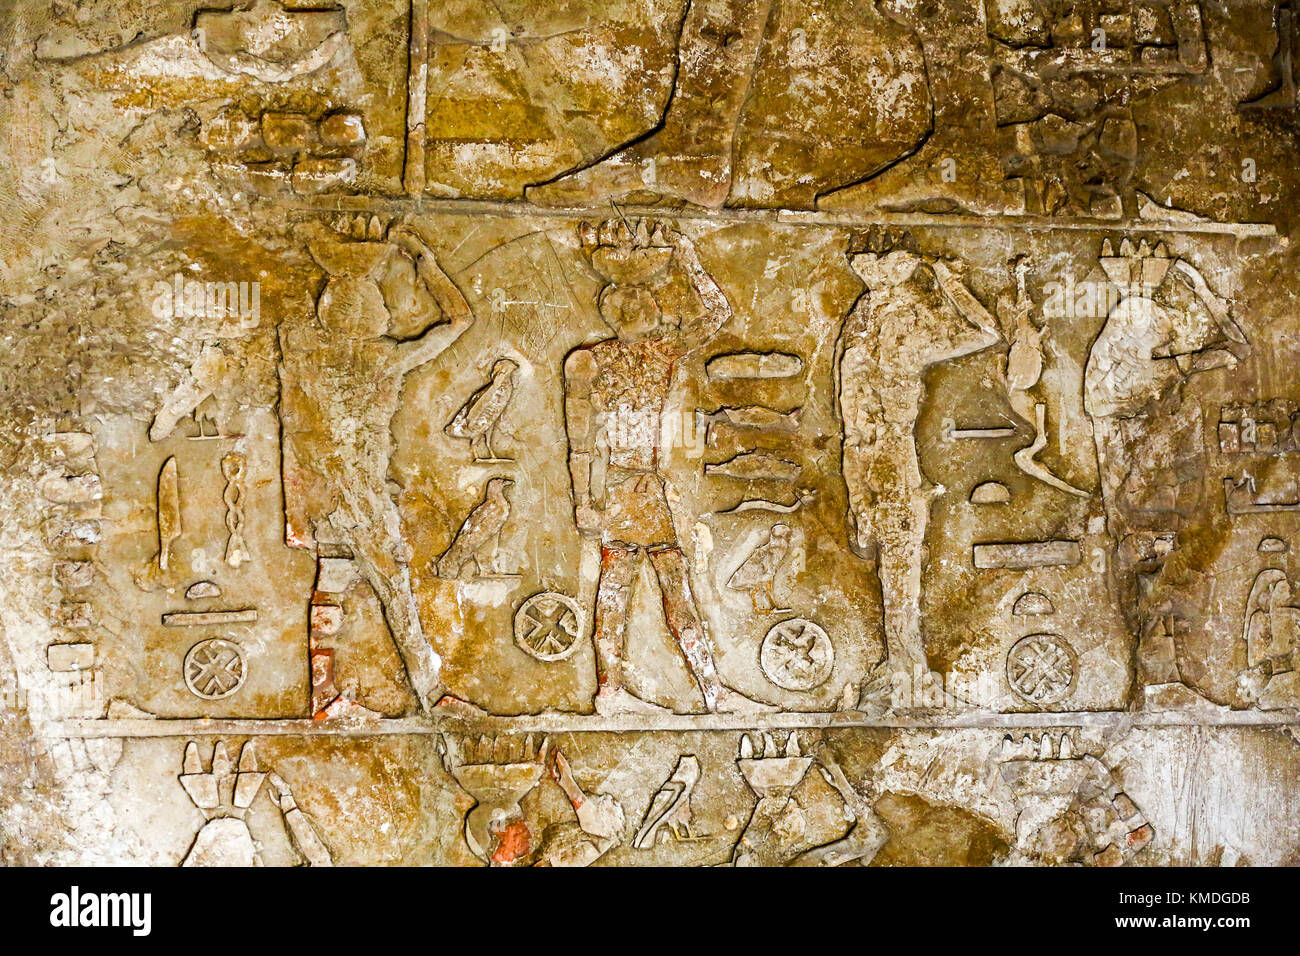 Egyptian hieroglyphics on a slab of stone inside the Egyptian Museum, Cairo, Egypt, North Africa Stock Photo